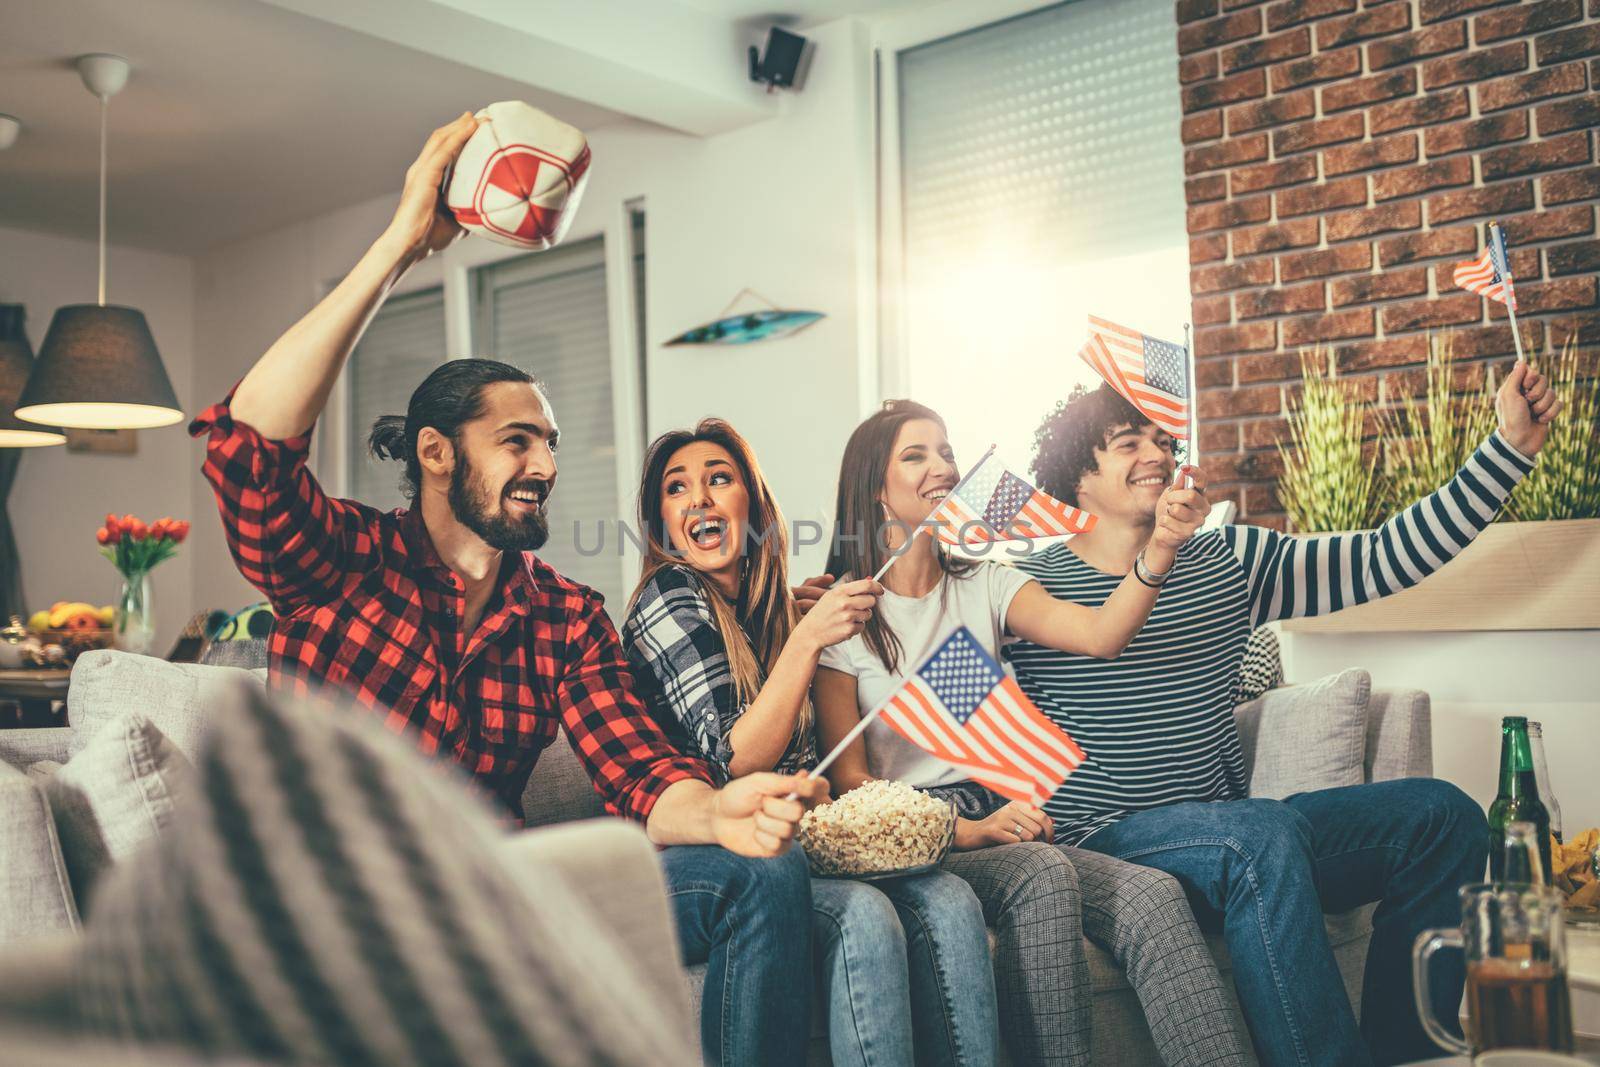 Friends are fans of sports games as American football love spending their free time at home together. They are screaming and gesturing for a victory. 